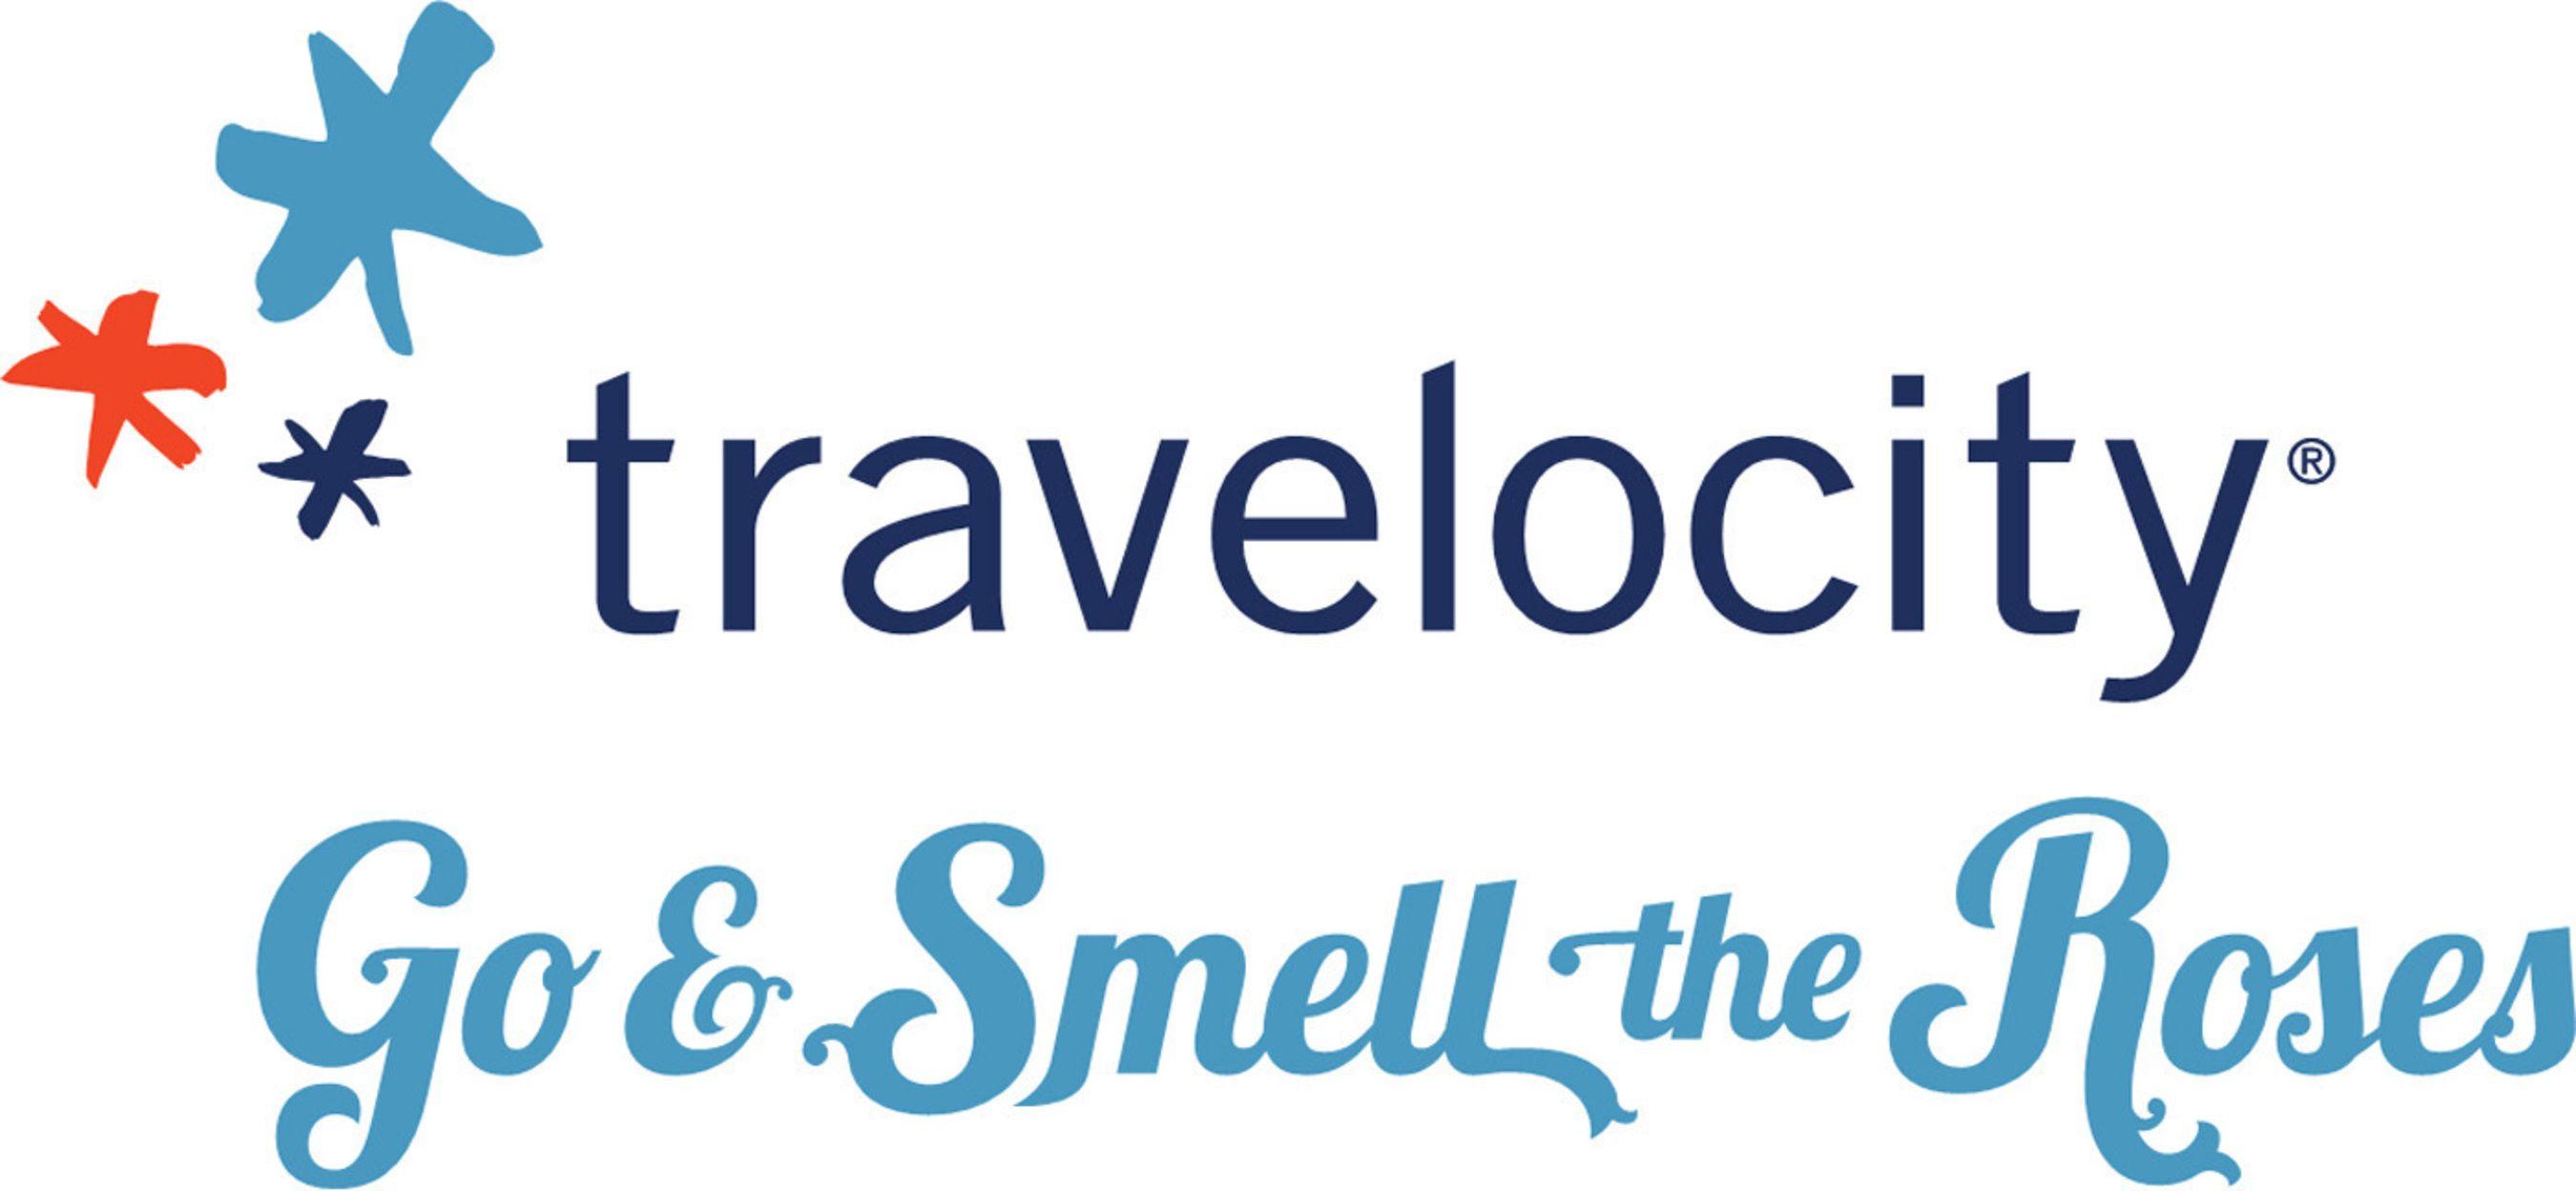 Travelosity Logo - Travelocity To Promote Travel Packages With Extended Format TV Spots